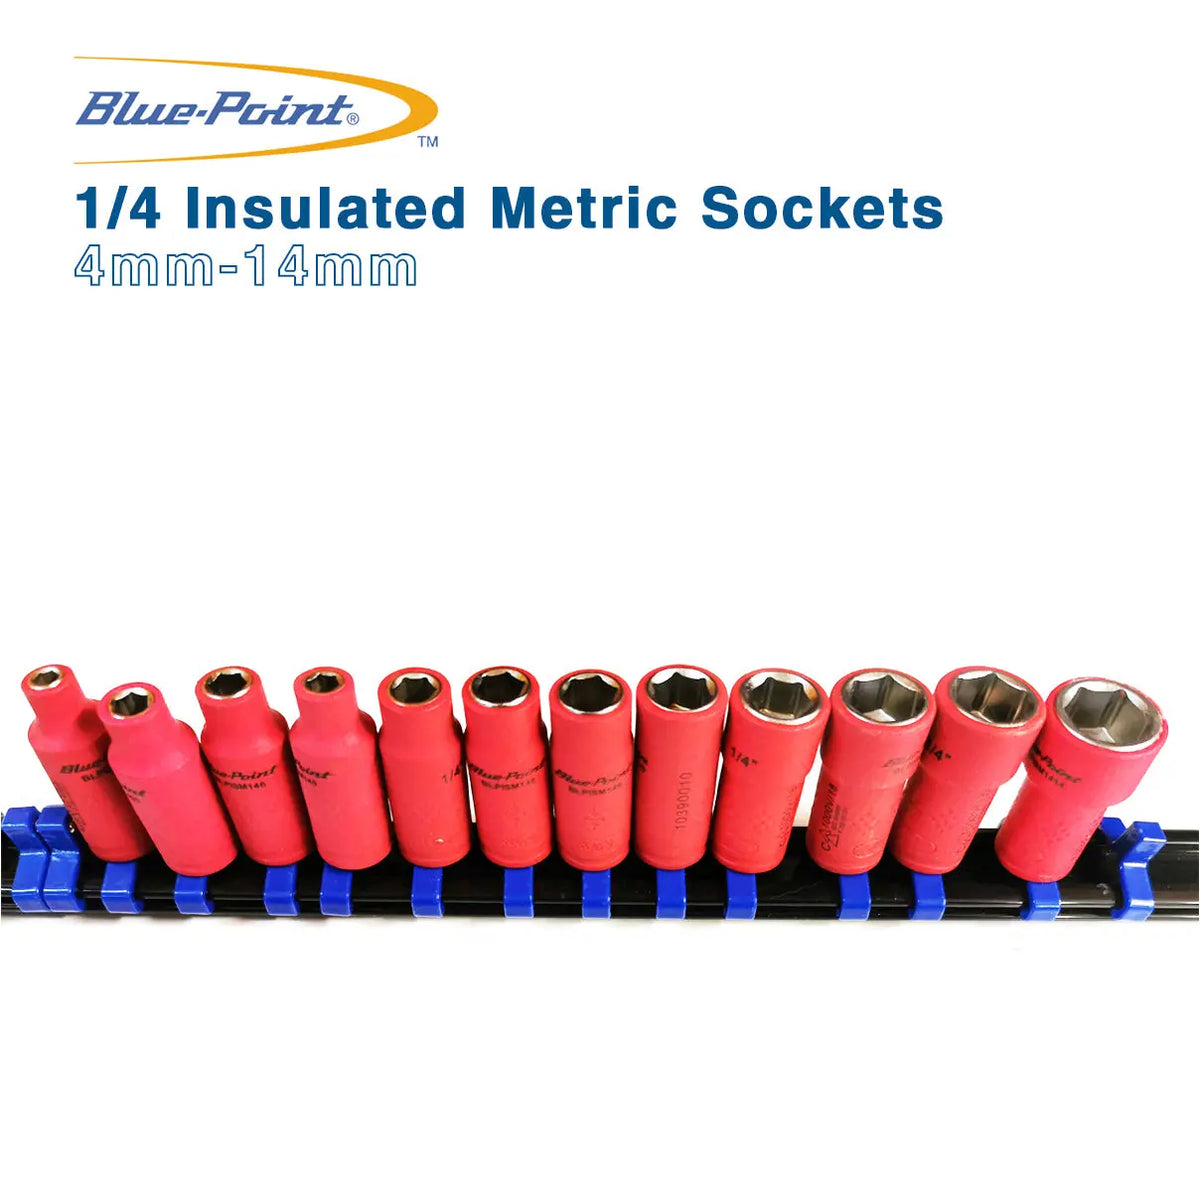 Blue Point 1/4 Insulated Metric Sockets 4mm-14mm 12 Sockets BluePoint